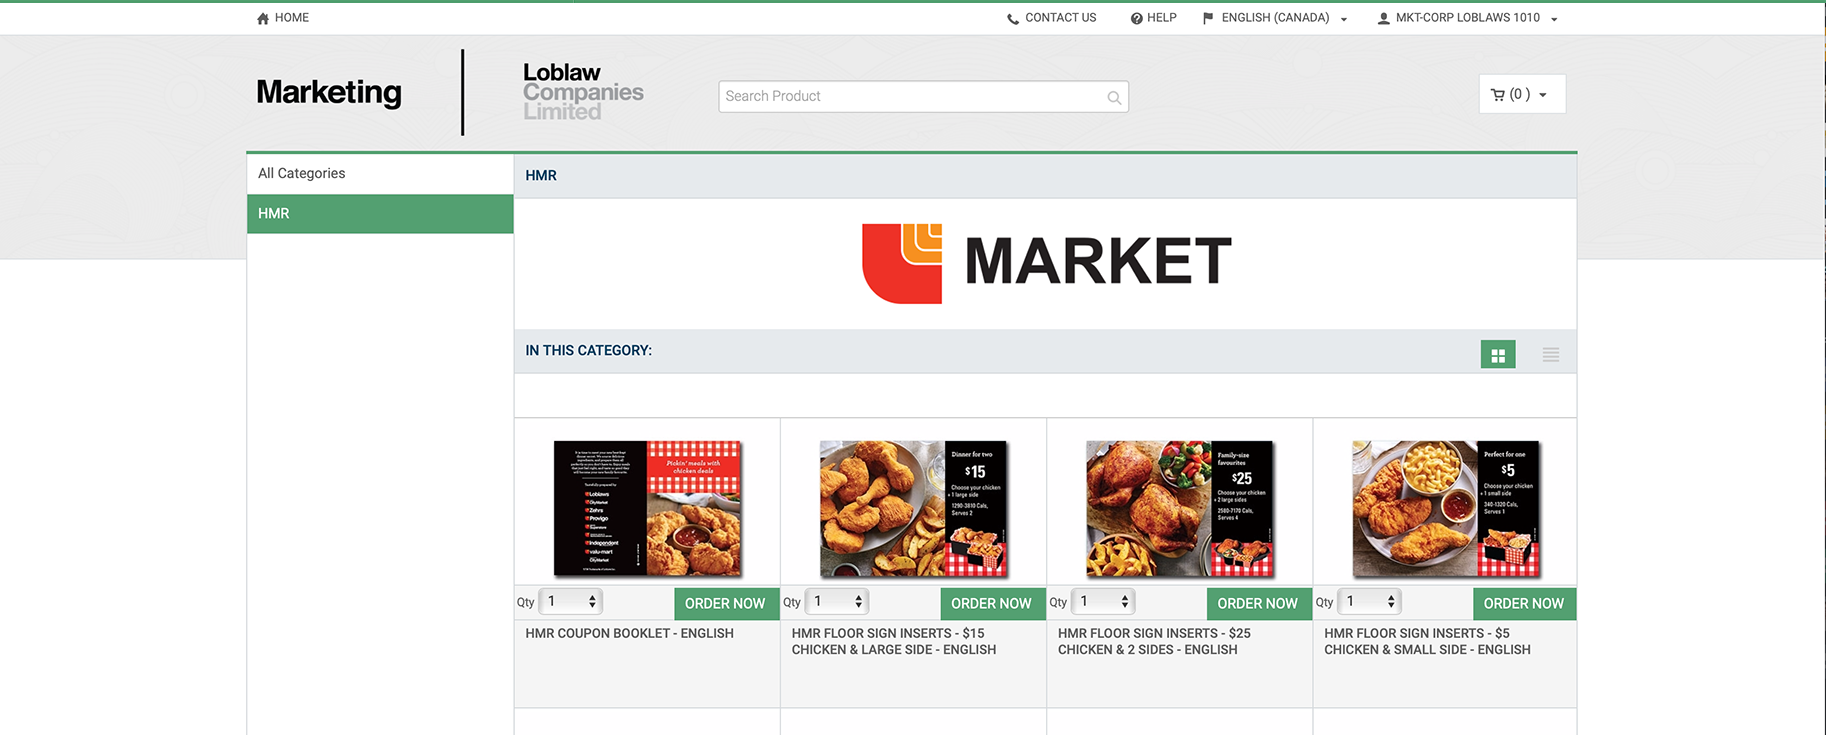 View of the Loblaws Marketing online portal